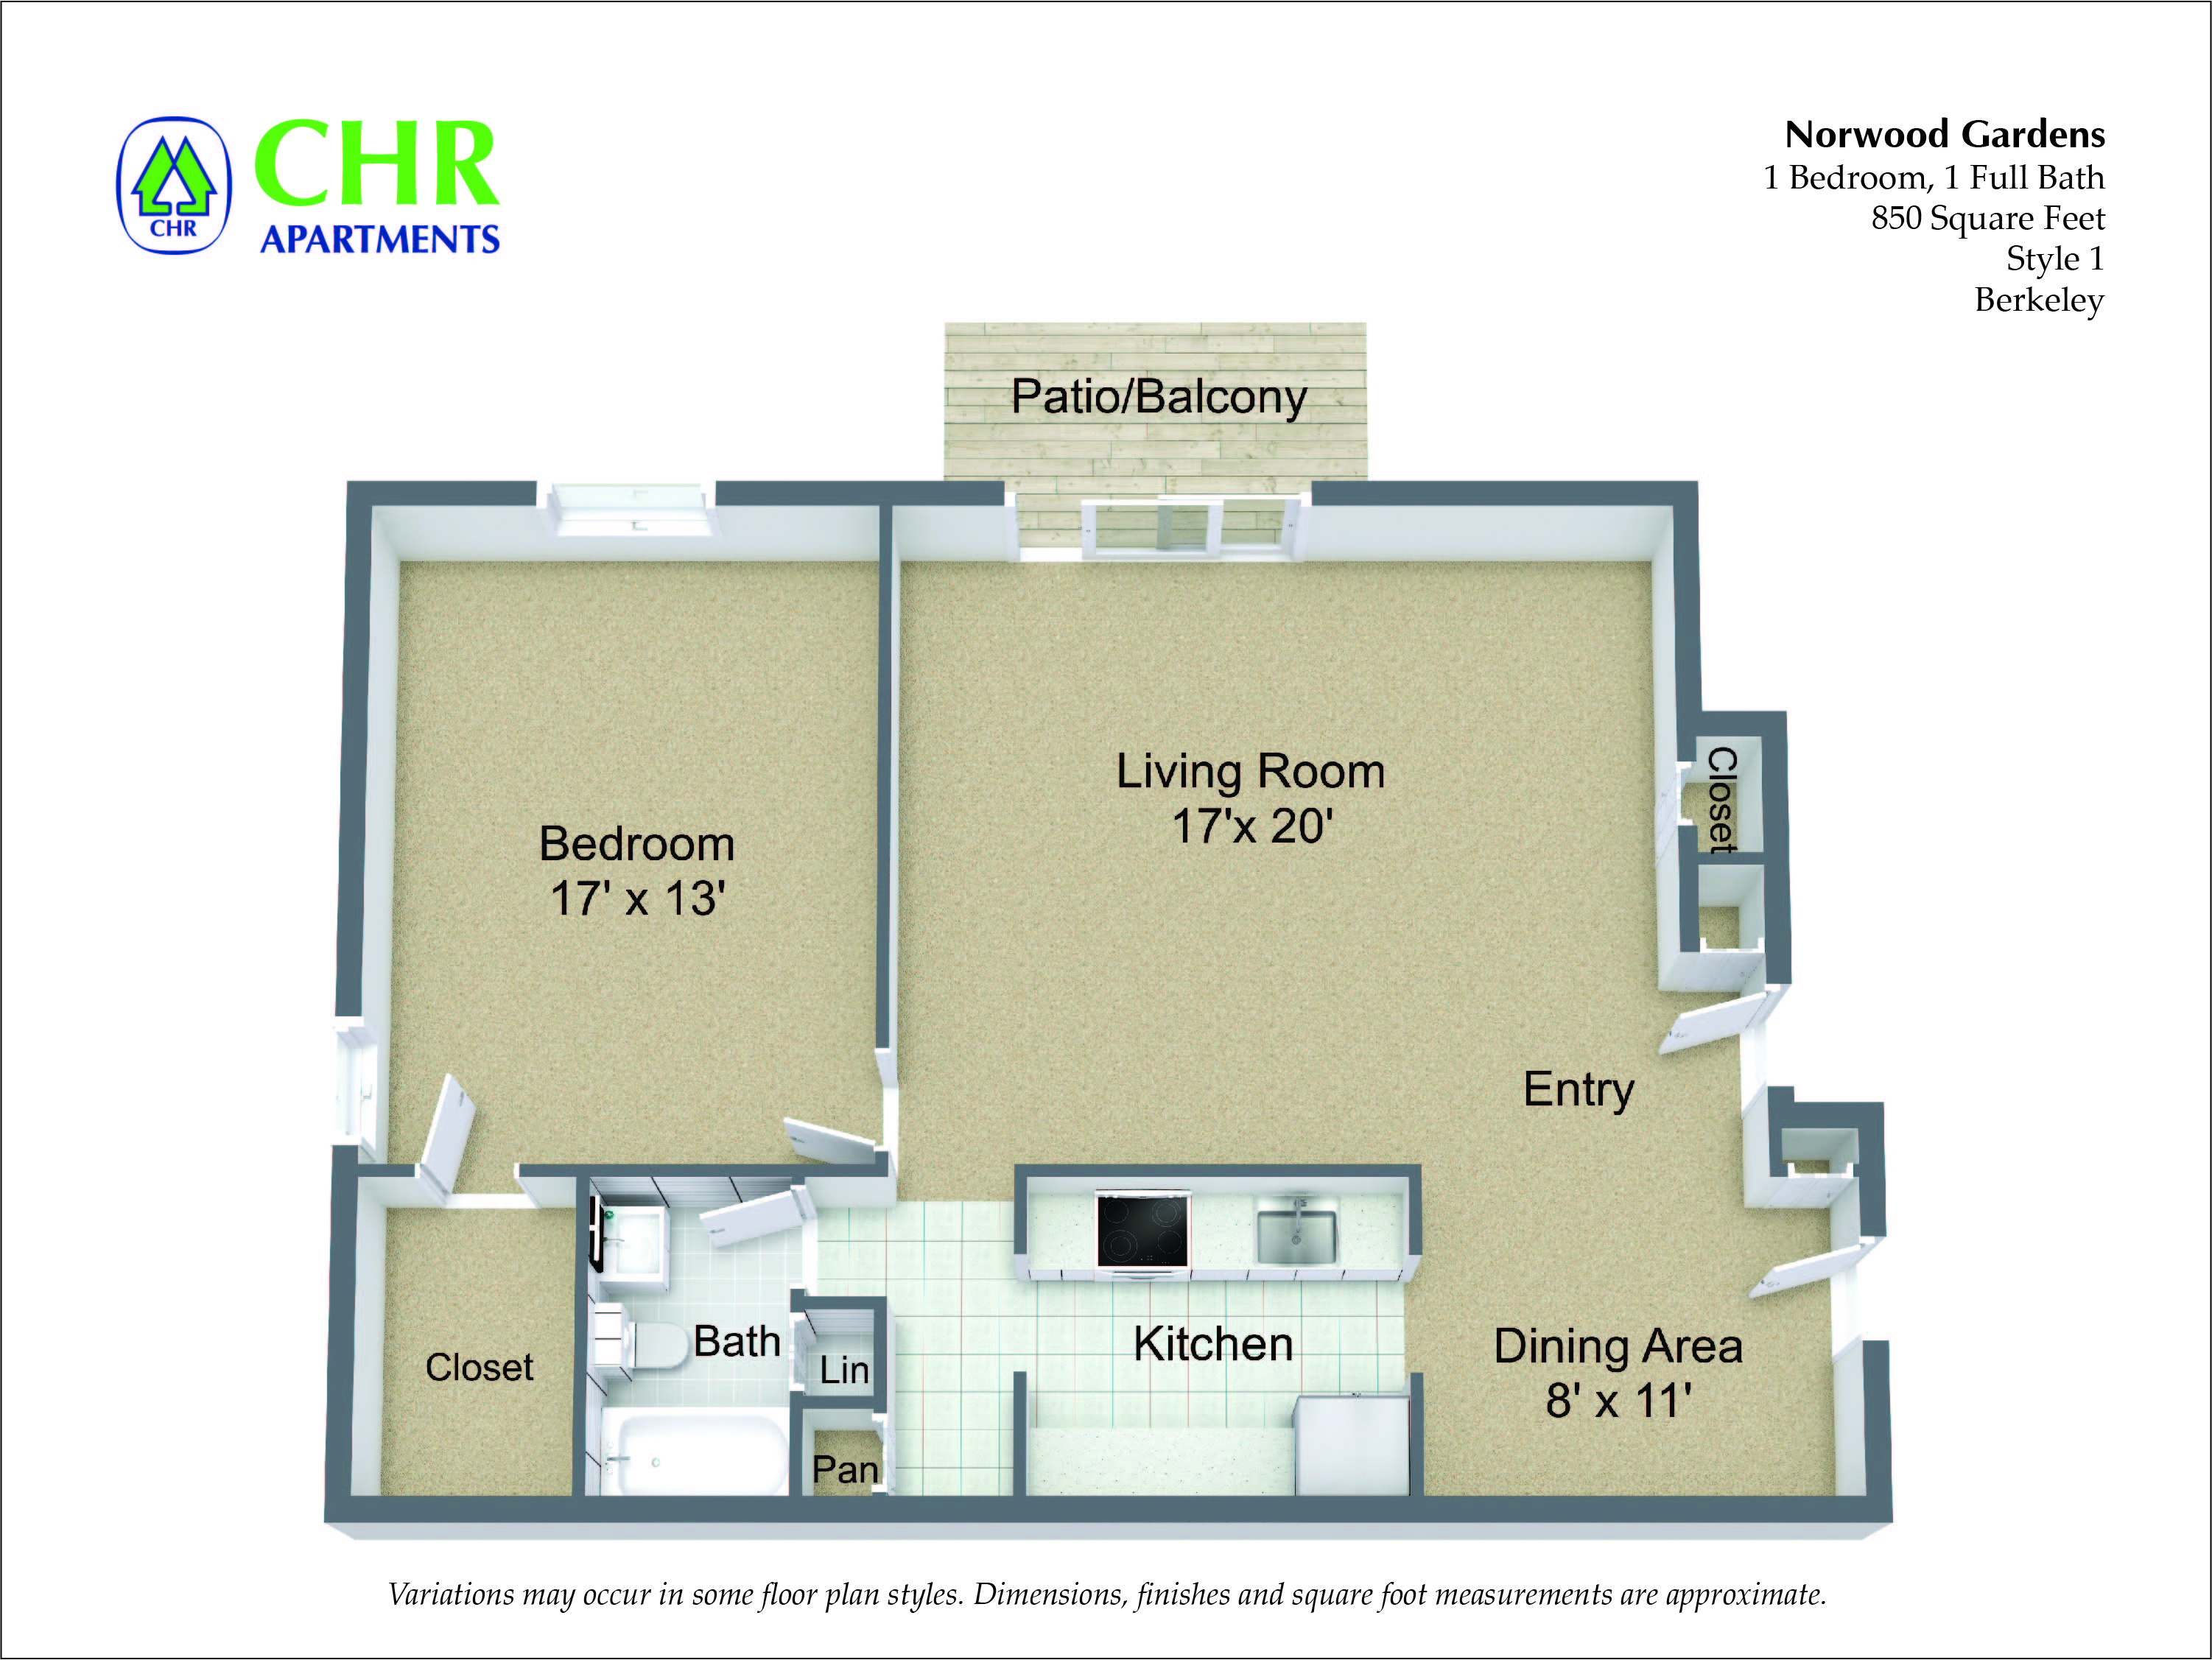 Click to view 1 Bedroom with Dining Area floor plan gallery